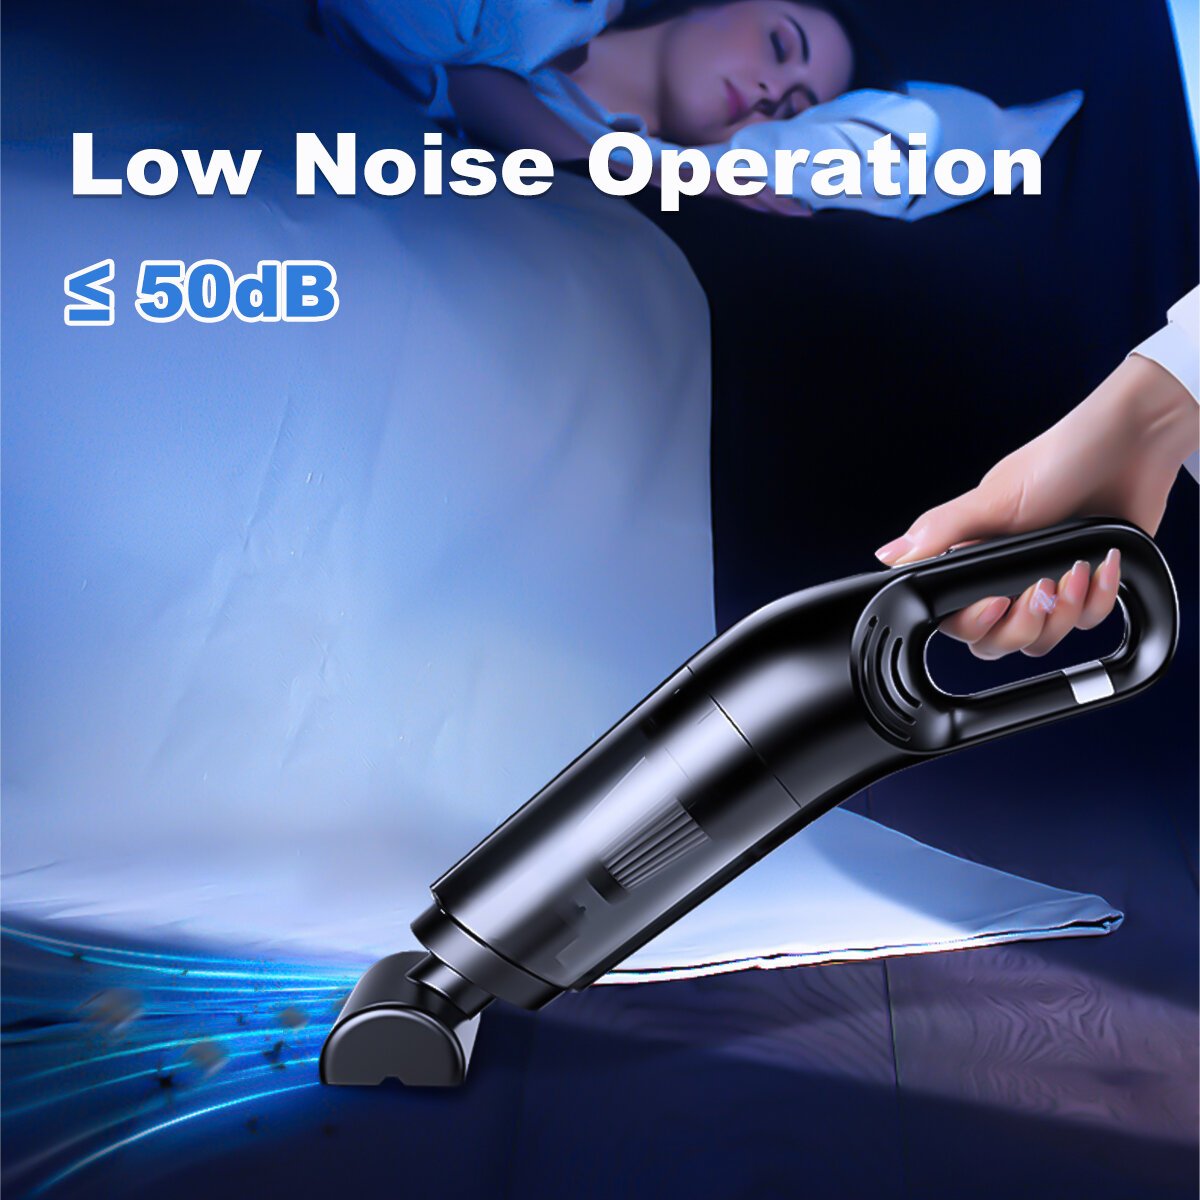 Cordless Handheld Vacuum Cleaner 10000pa Suction Wet Dry 120W 2000mAh Battery 0.5L Capacity Low Noise for Home Car